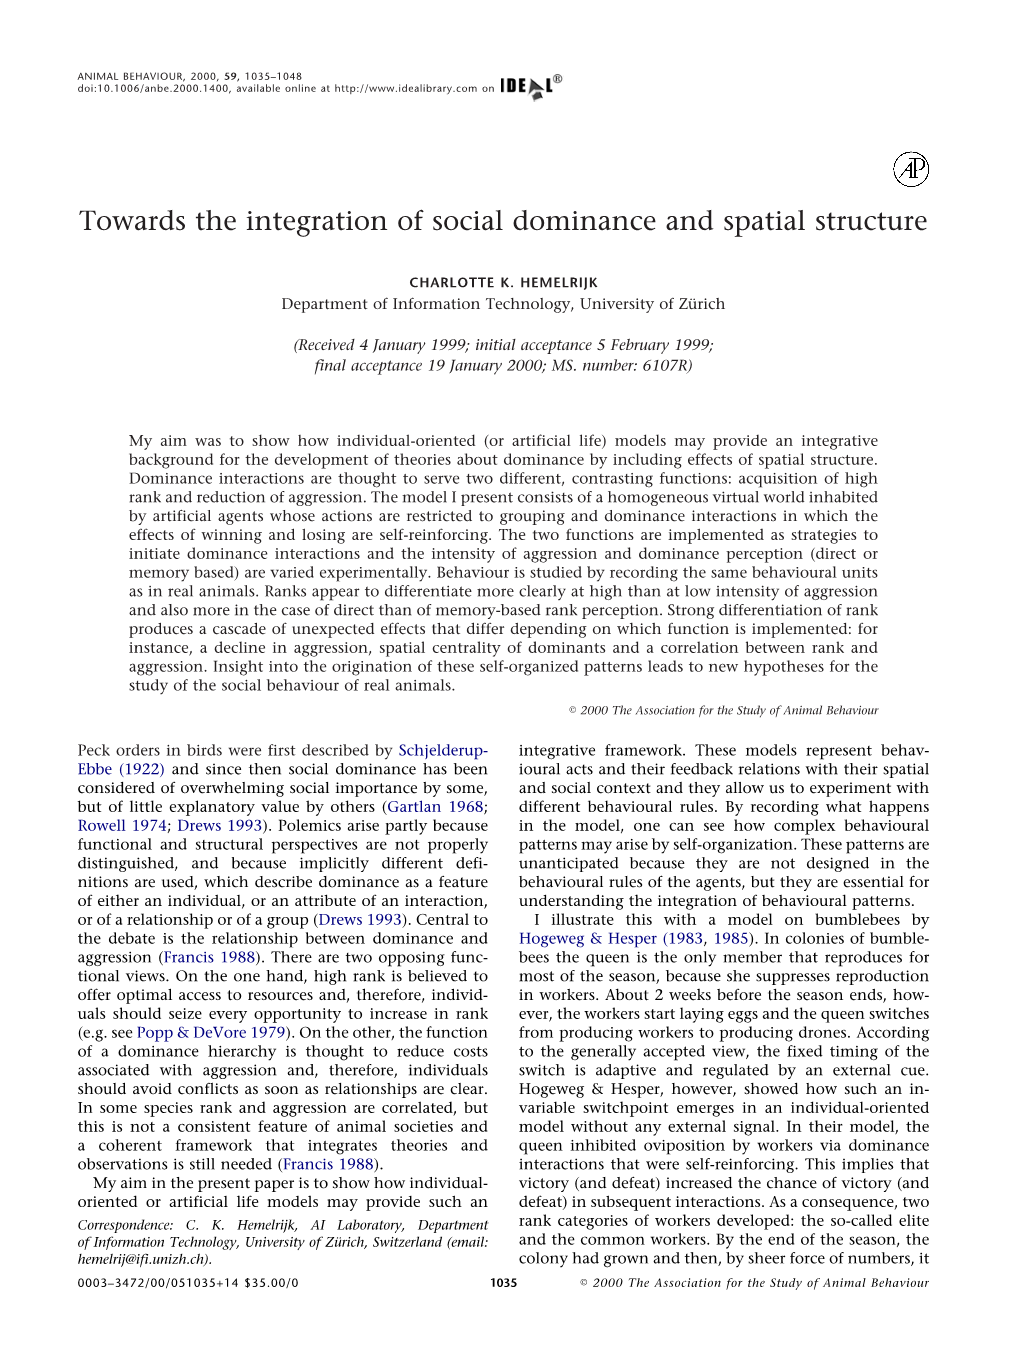 Towards the Integration of Social Dominance and Spatial Structure